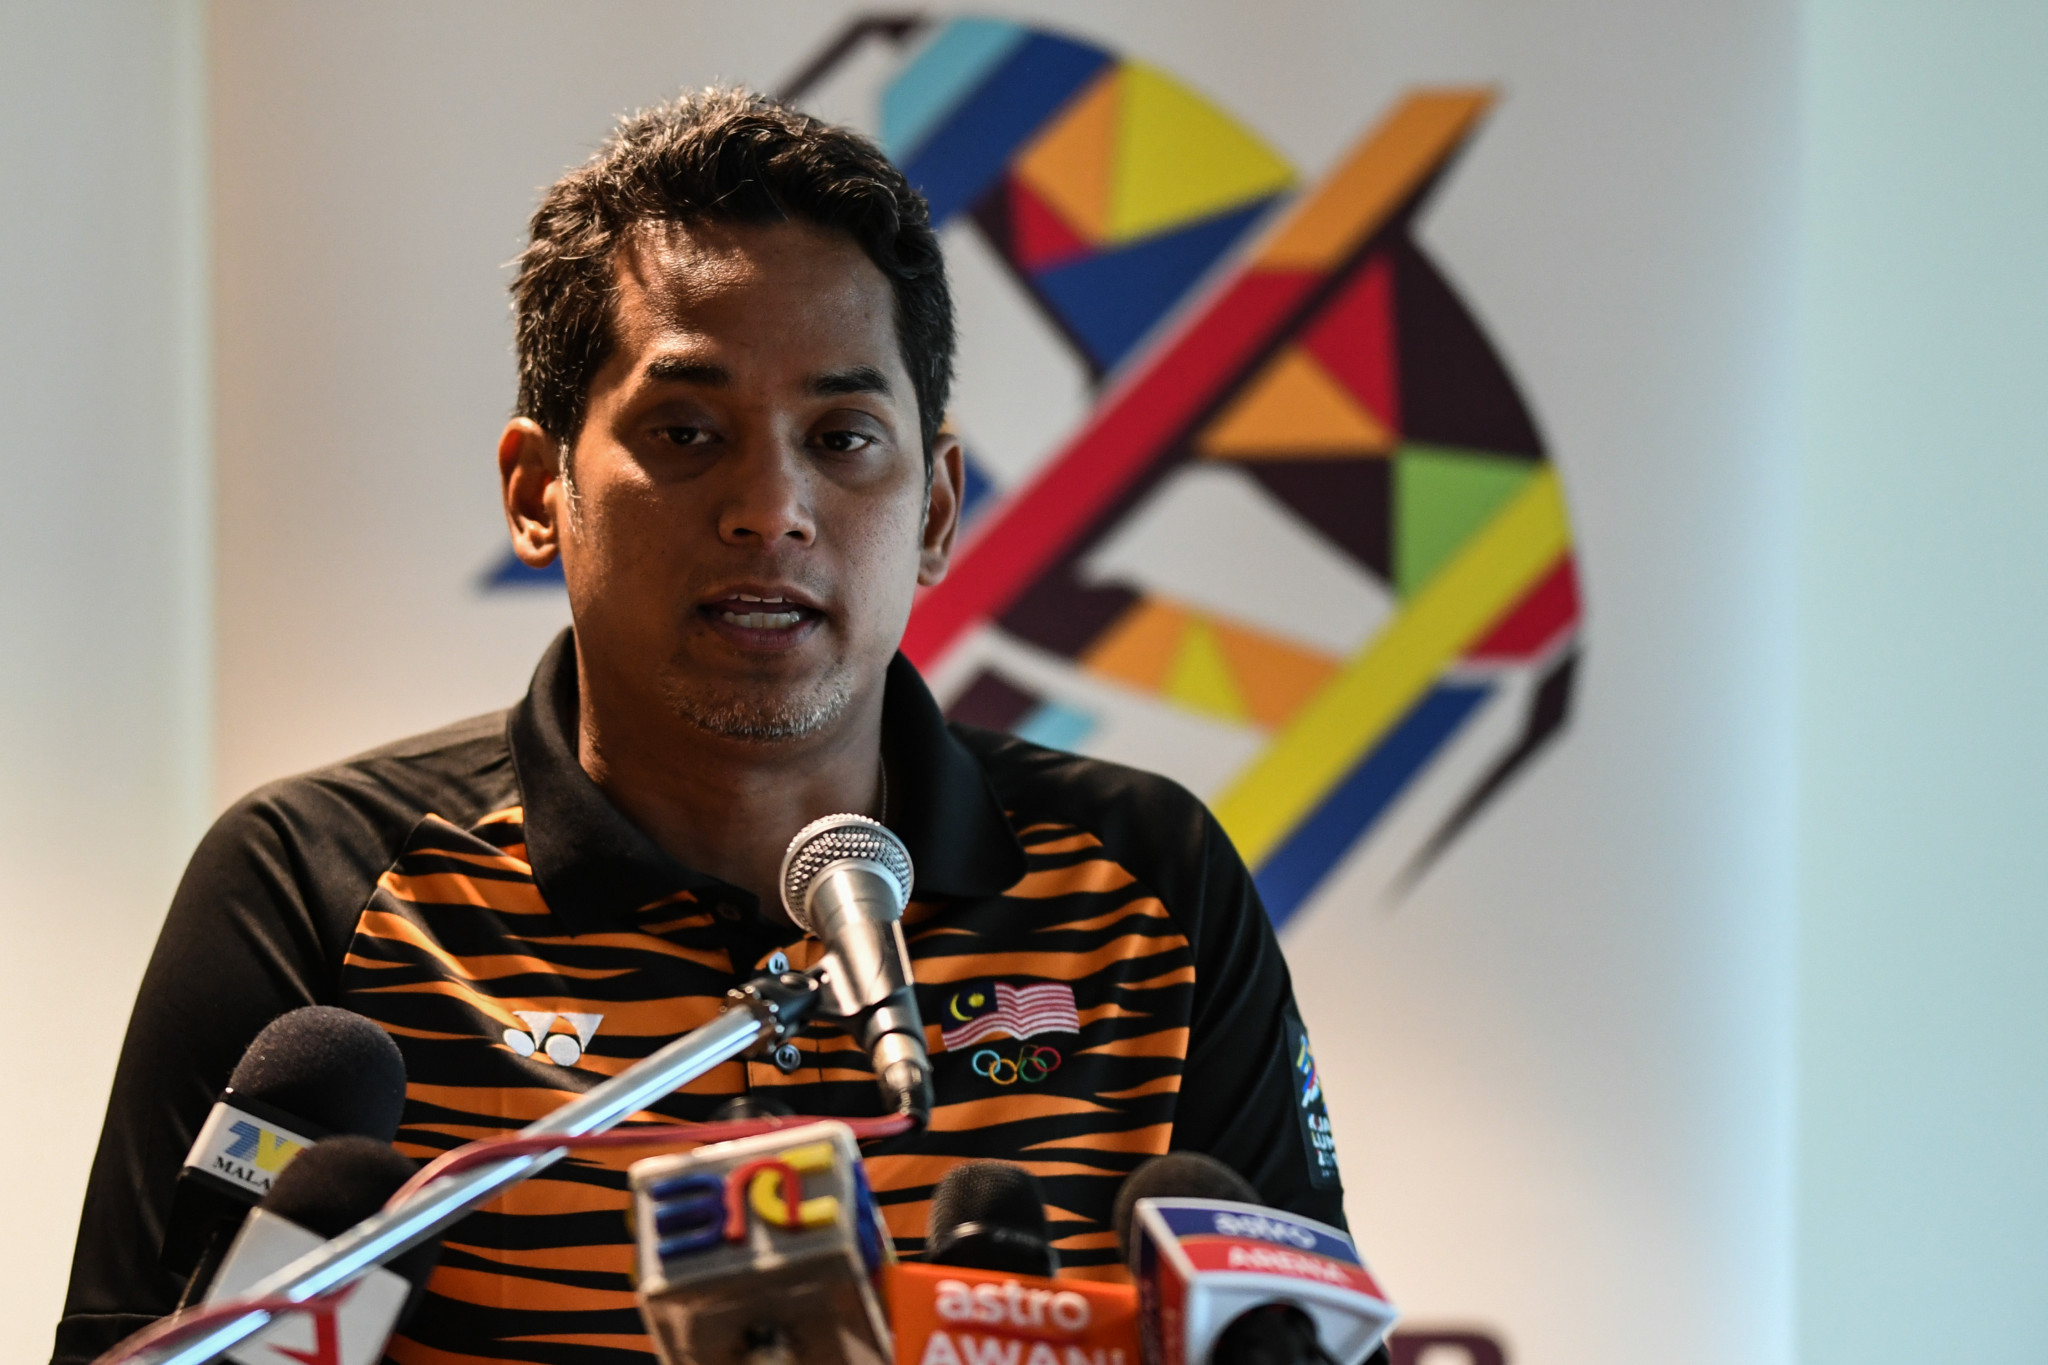 Malaysia's Youth and Sports Minister Khairy Jamaluddin has revealed Kuala Lumpur may bid for the 2022 Commonwealth Games after all ©Getty Images